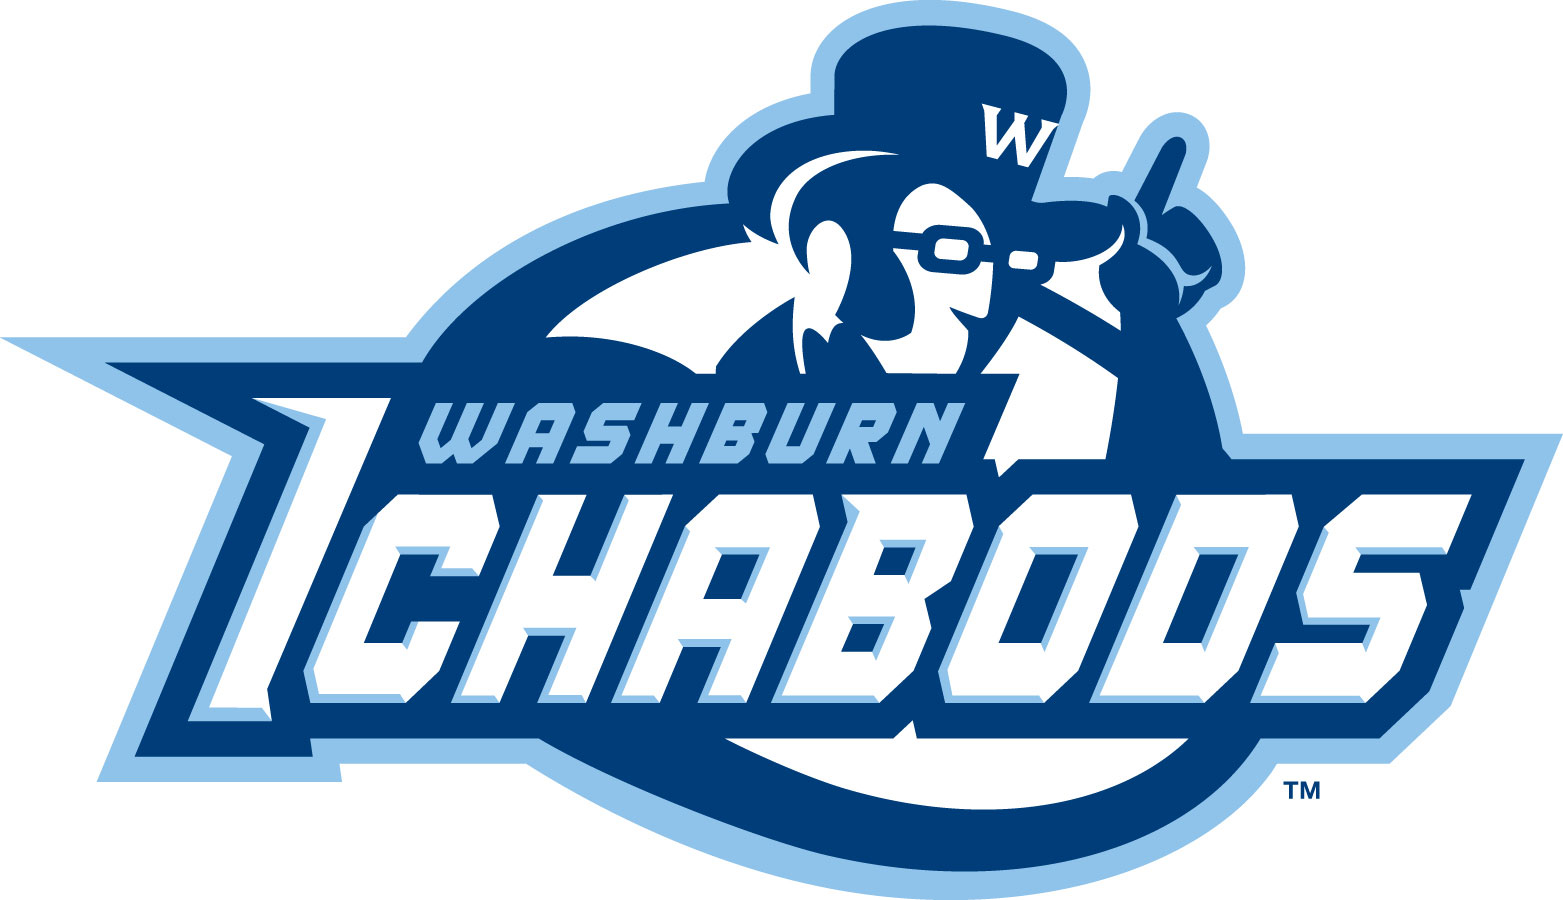 Washburn University for the Missouri Wolverines Youth Tackle and Flag Football Club in Kansas City Missouri